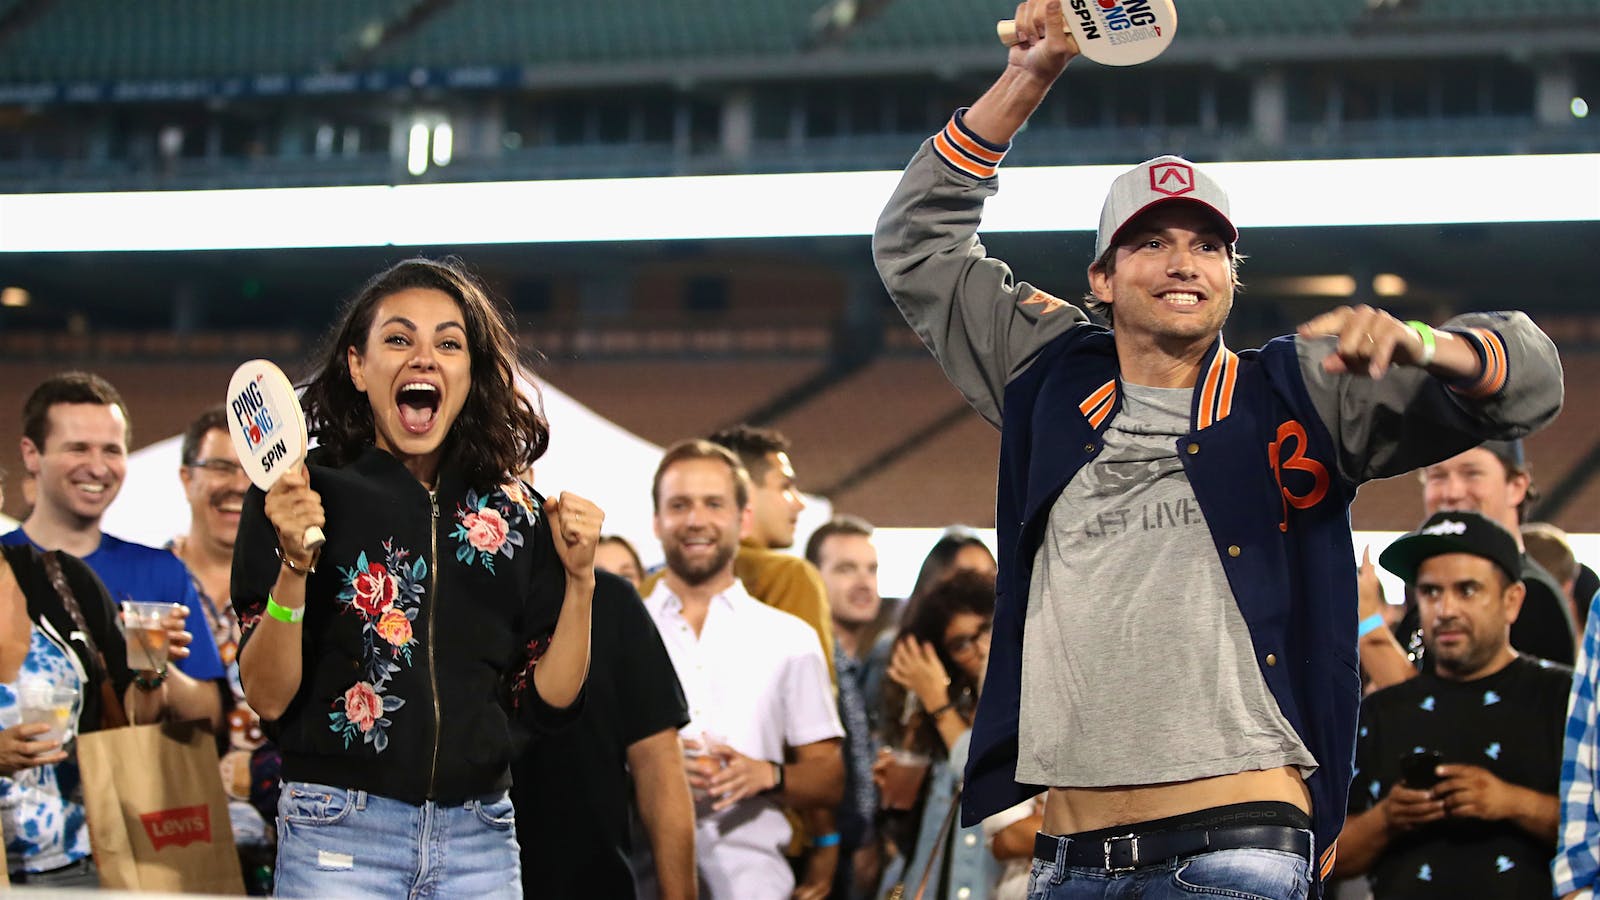 Ashton Kutcher and Mila Kunis’ Outside Wine Supports Tony Hawk’s Charity and More